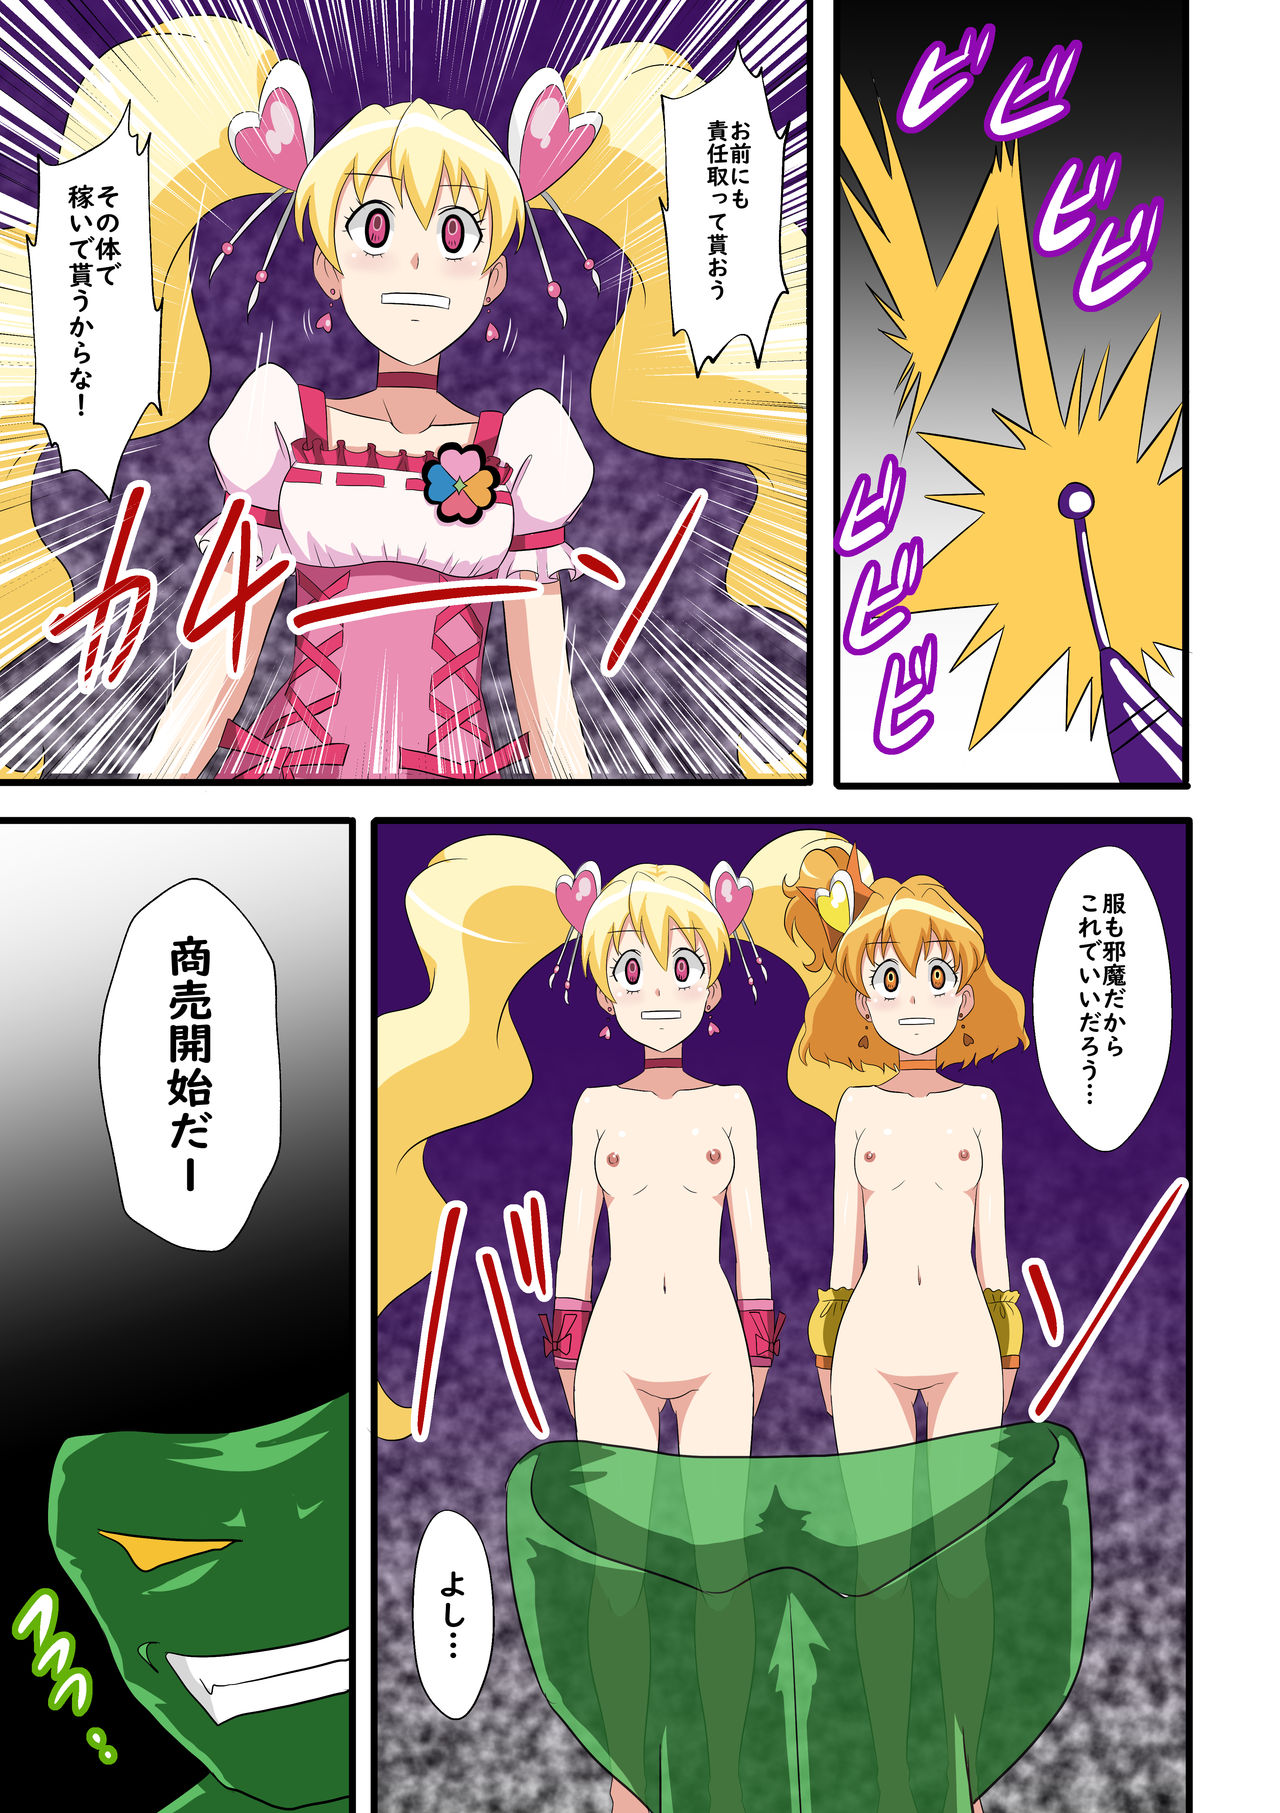 [Toki] Human piggy bank making machine Ⅱ ~Pure cure made into a piggy bank~ page 7 full